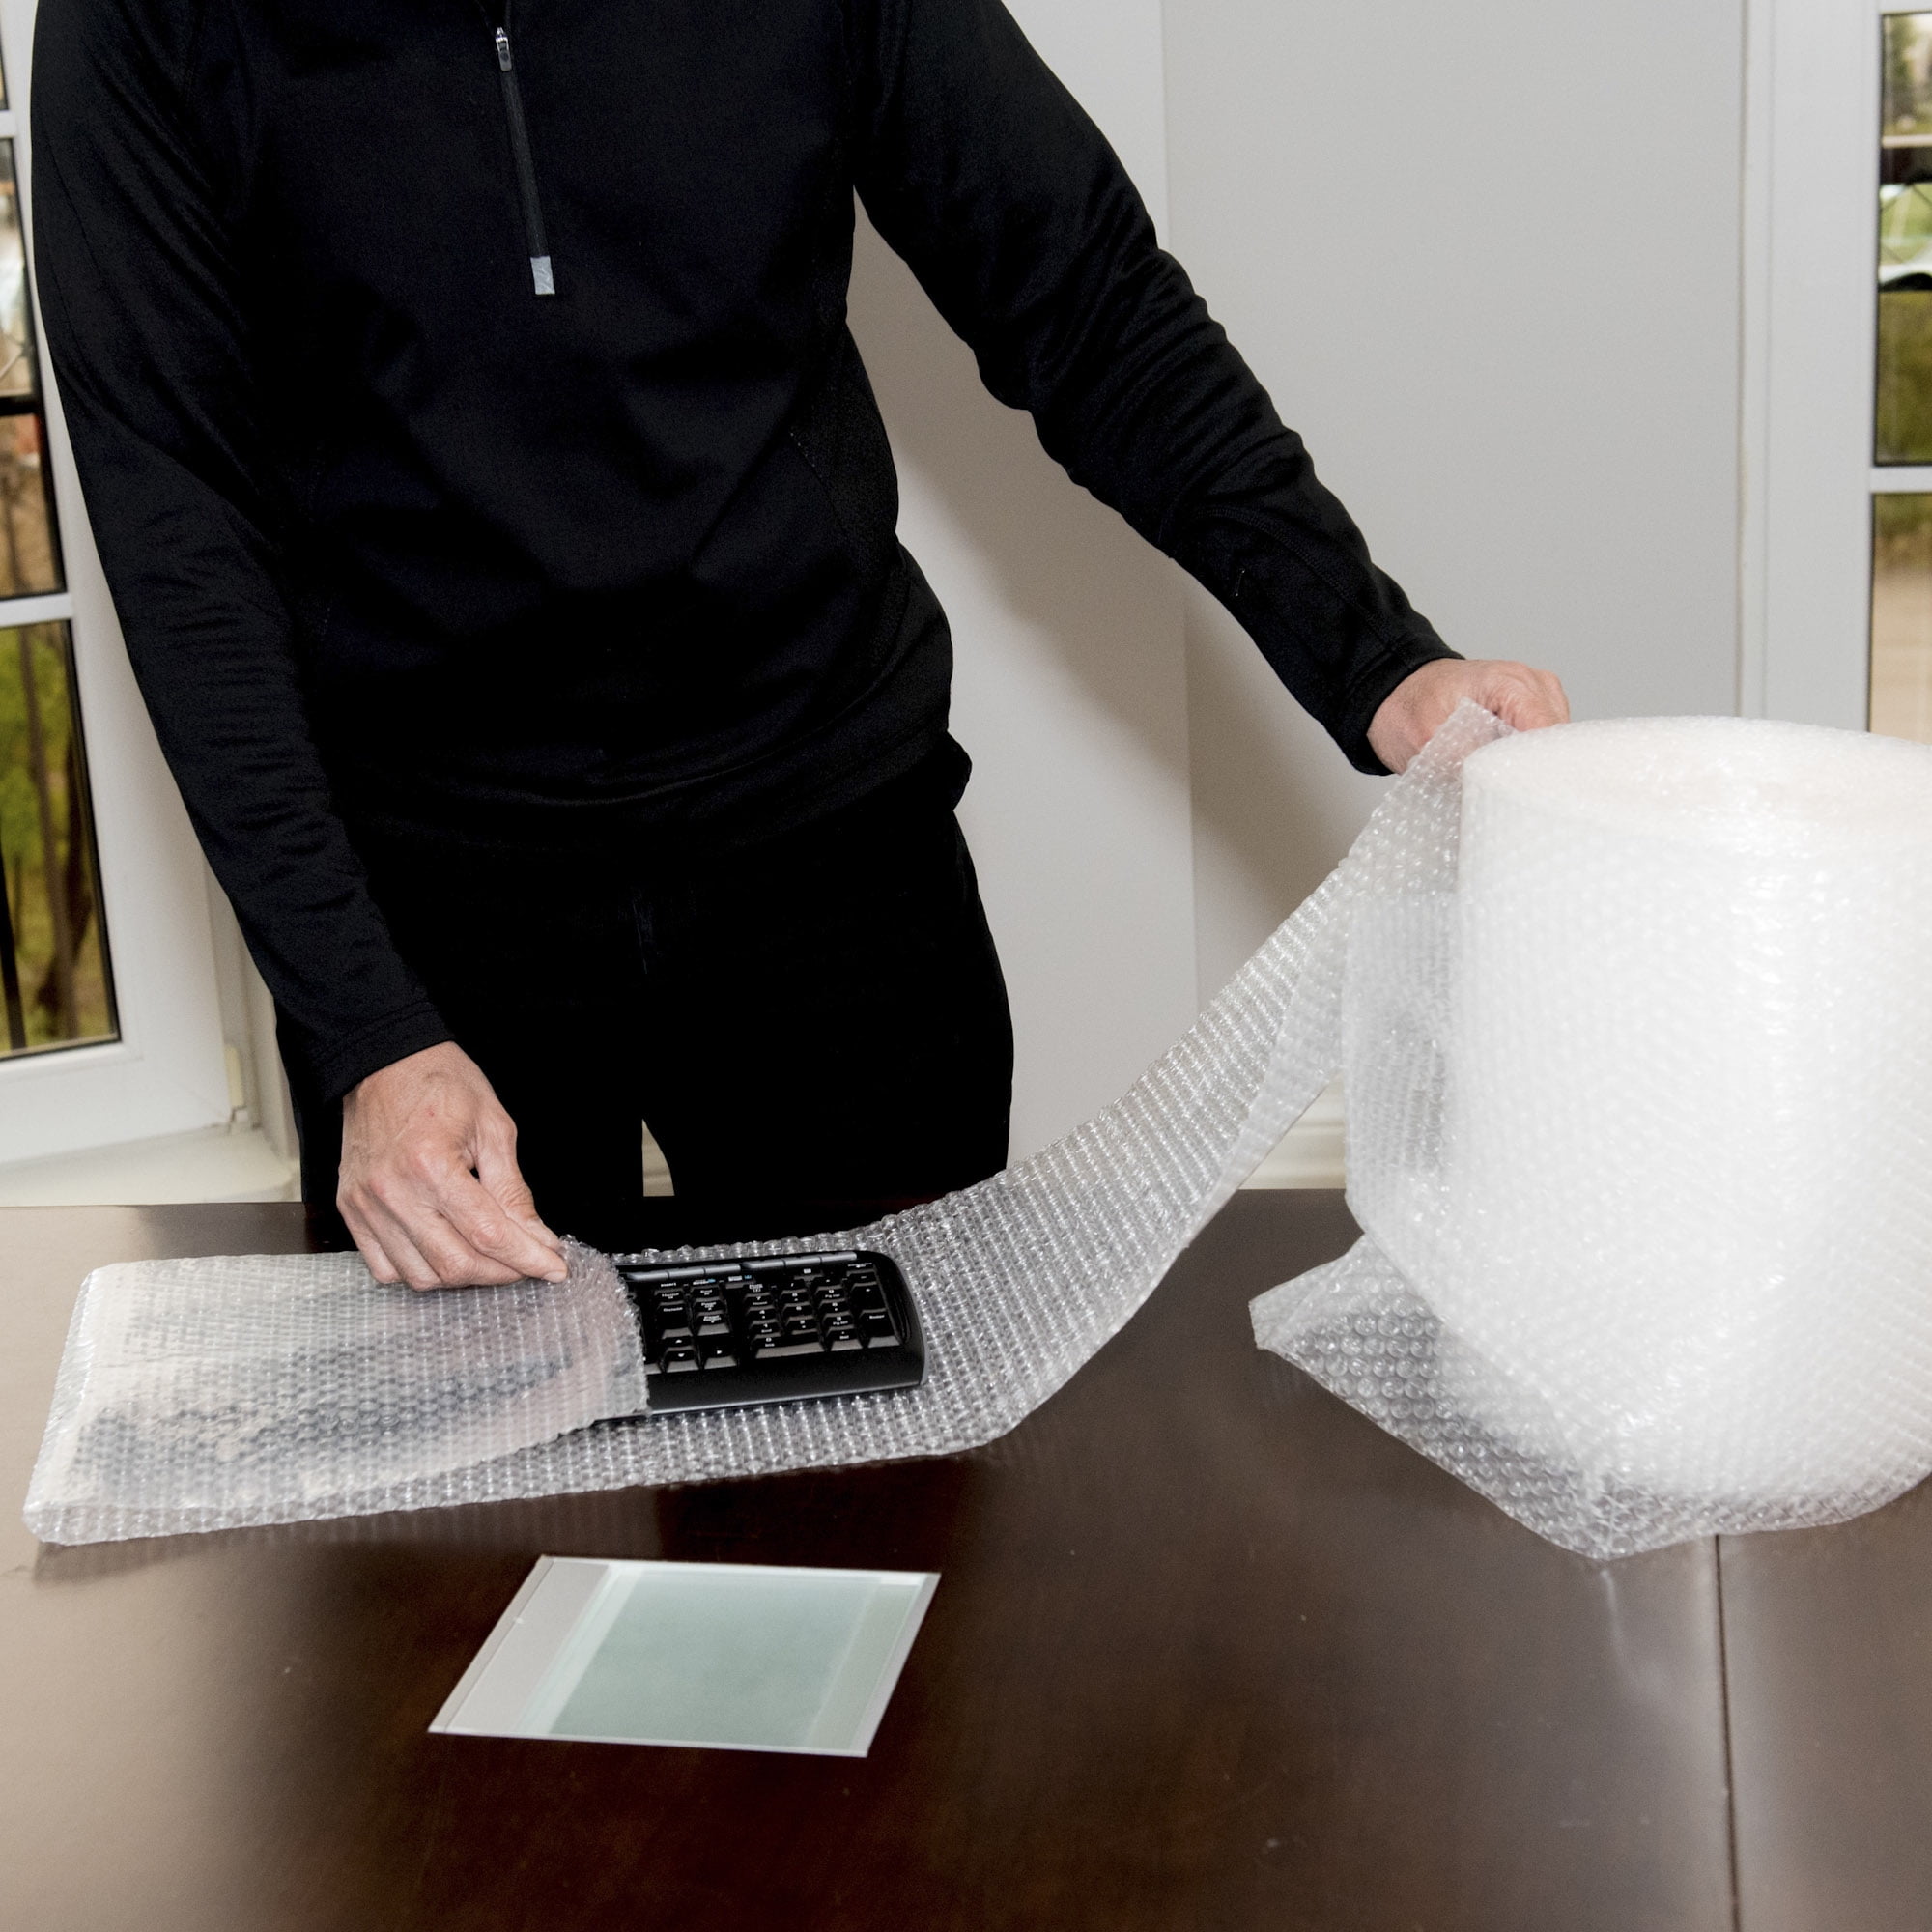 Project Source 12-in x 125-ft Bubble Cushion in the Packing Supplies  department at